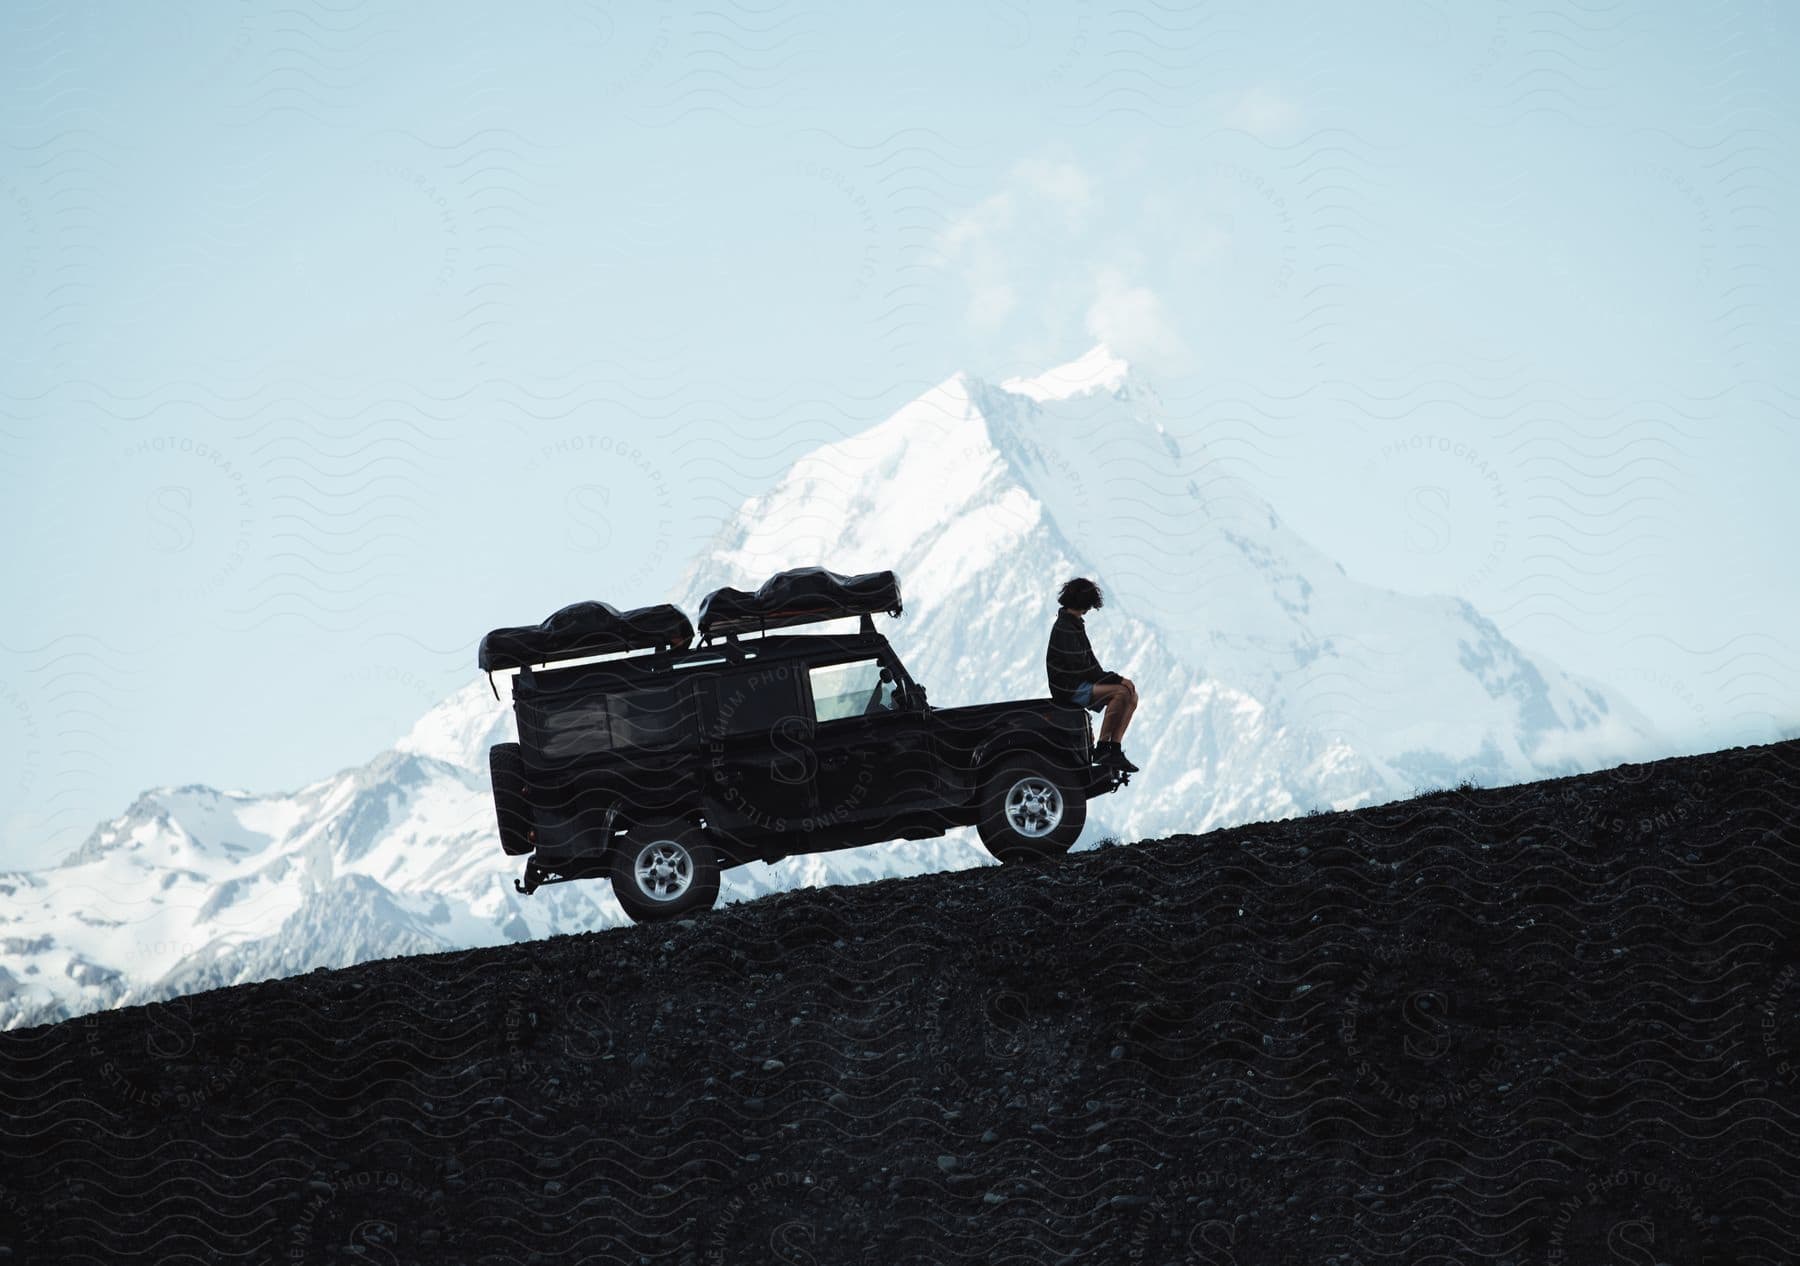 A man sits on a jeep parked on a snowy slope with mountains in the distance